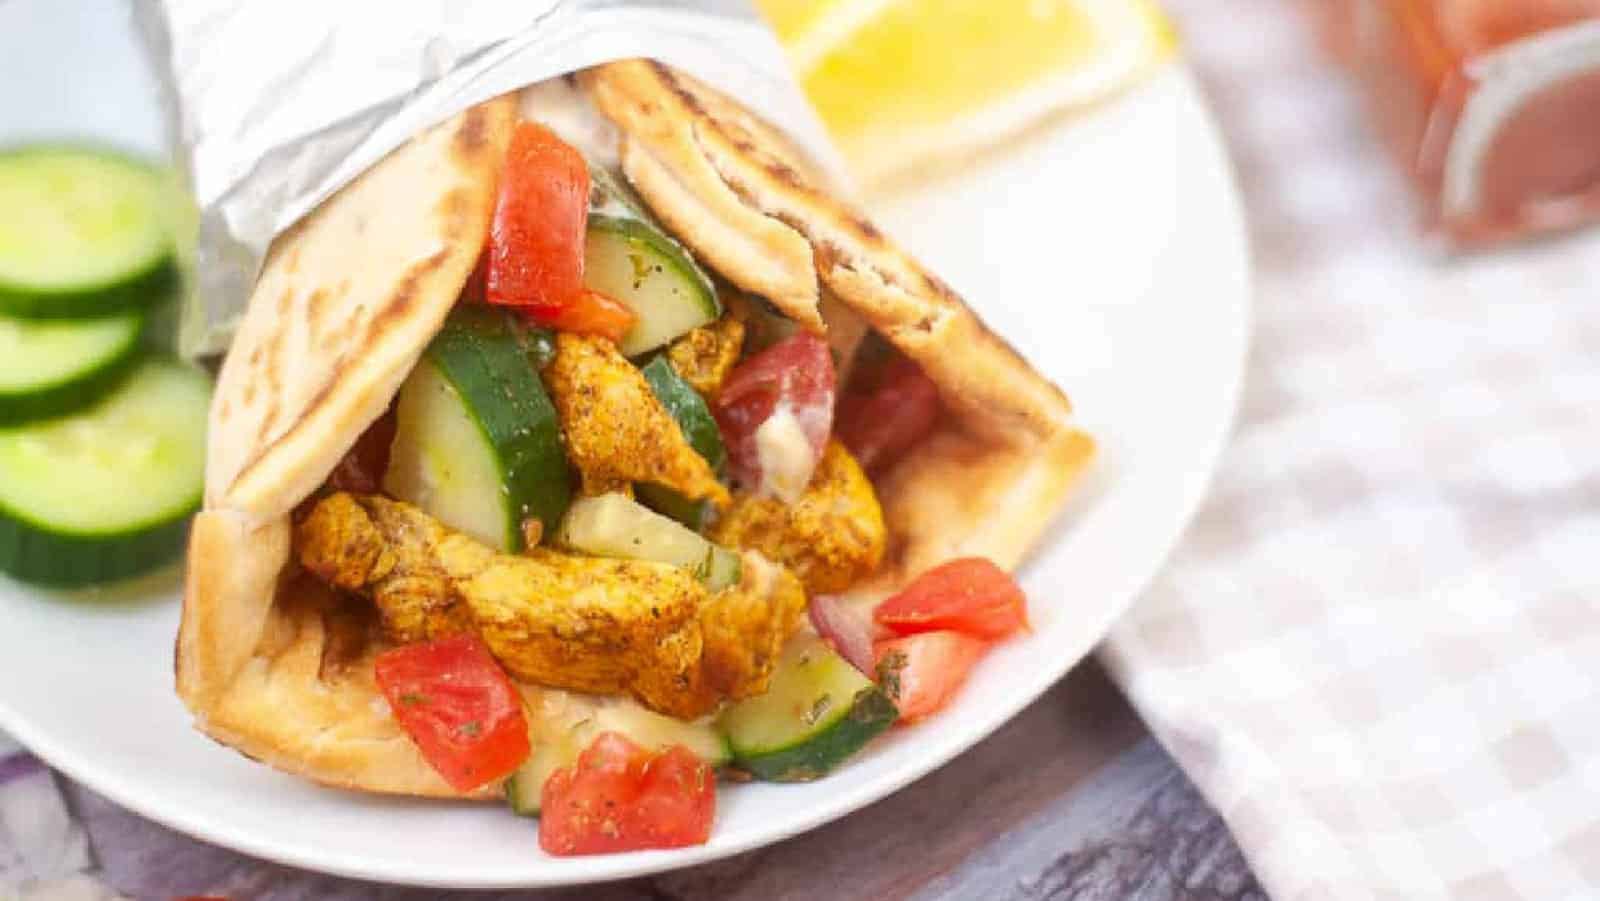 <p>Talk about a wrap done right! The air fryer Chicken Shawarma Wraps will get you hooked in no time at all. It’s that magical mix of flavorsome chicken and spices all wrapped up. Who doesn’t love a delicious we-can-have-this-anytime kind of meal, right?<br><strong>Get the Recipe: </strong><a href="https://allwaysdelicious.com/air-fryer-chicken-shawarma-wraps/?utm_source=msn&utm_medium=page&utm_campaign=msn">Air Fryer Chicken Shawarma Wraps</a></p>